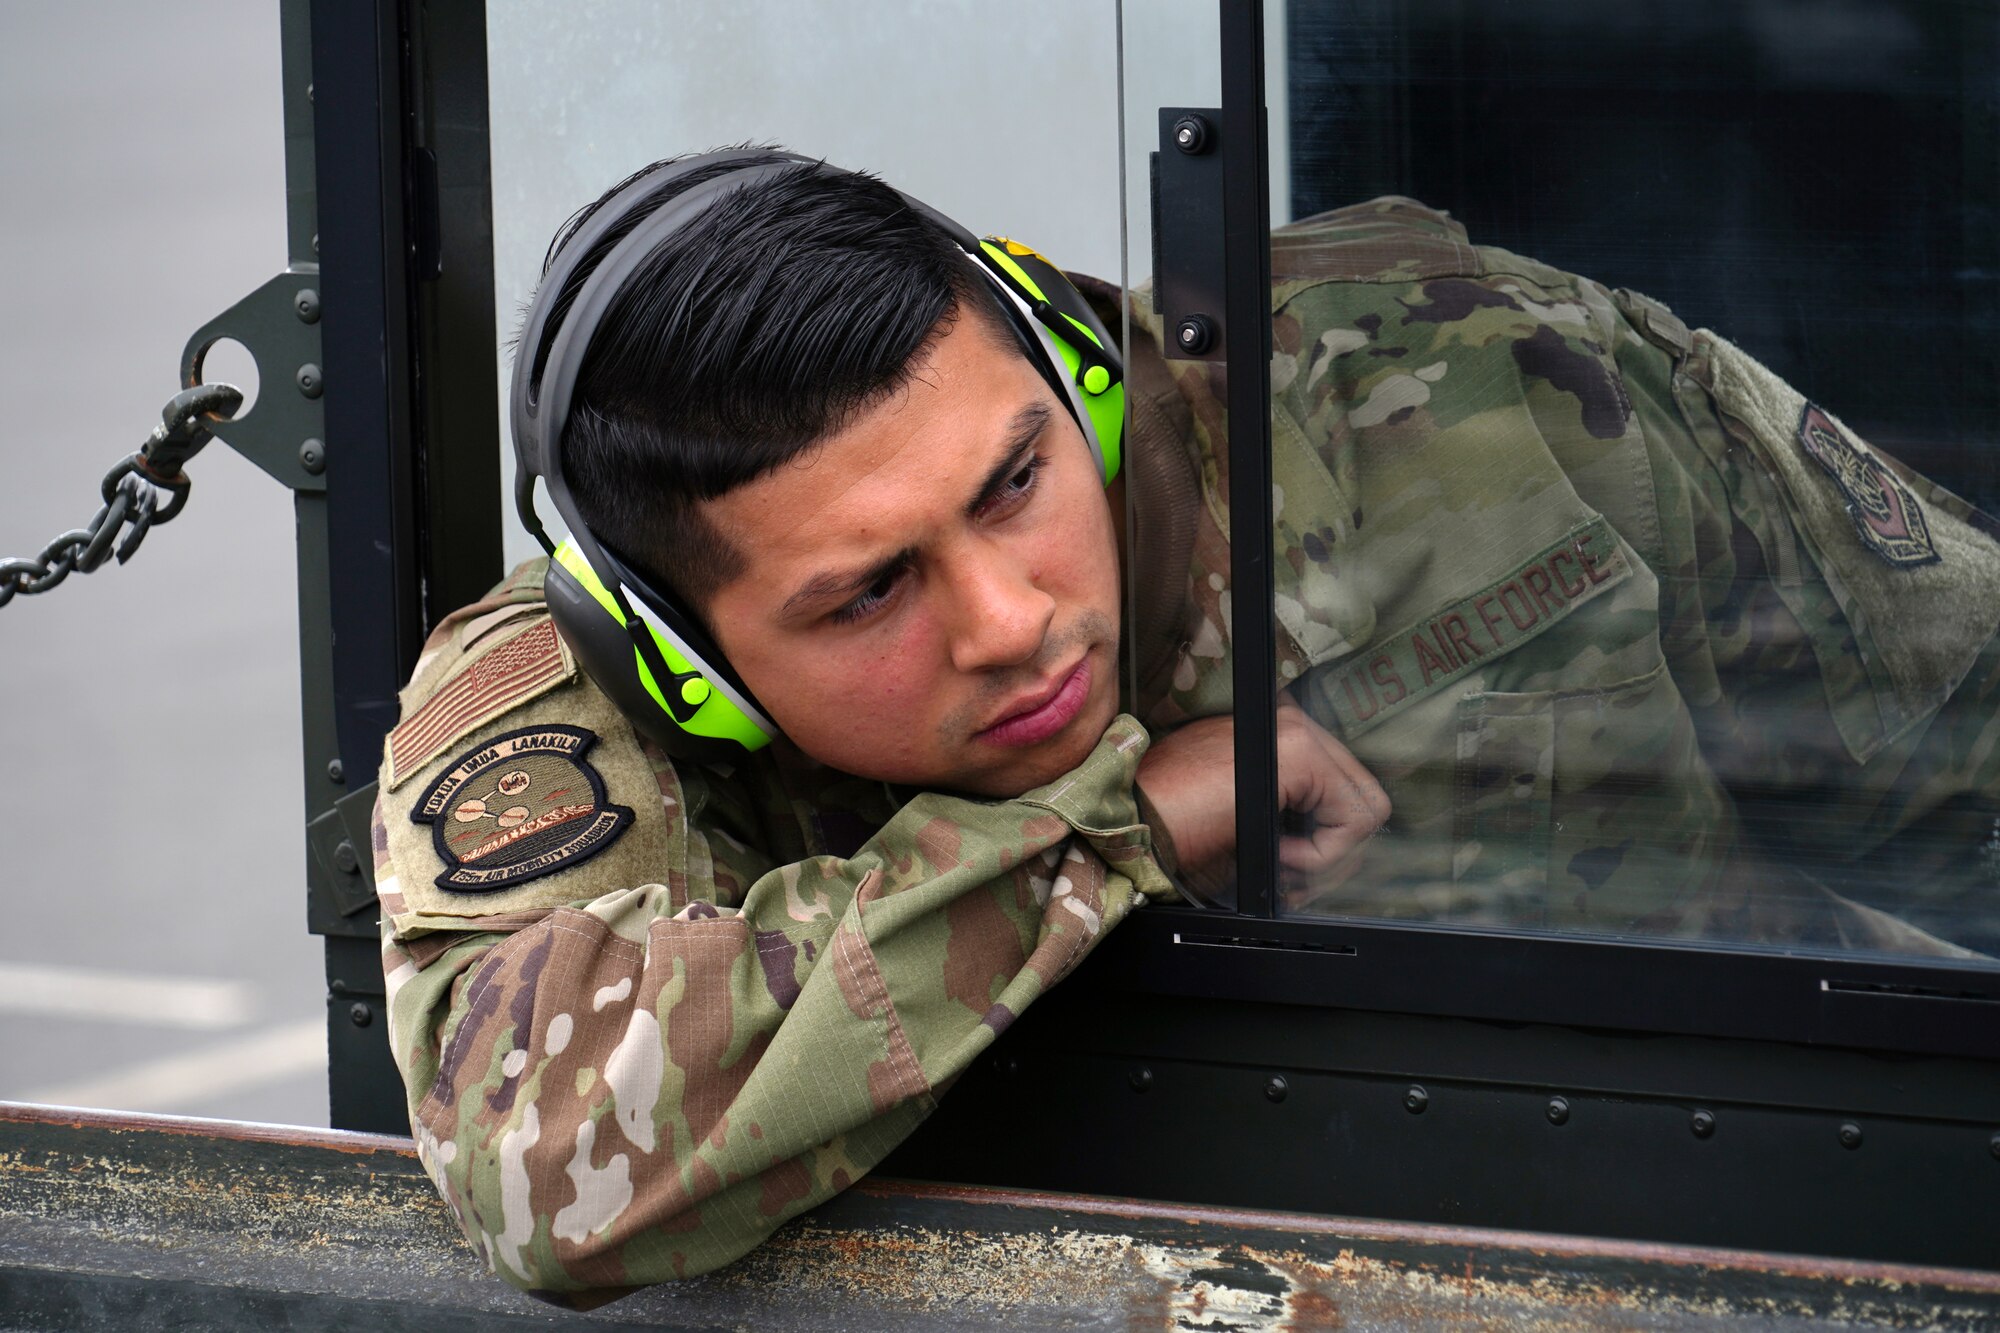 U.S. Air Force Senior Airman Mario Garcia, 735th Air Mobility Squadron air freight journeyman, observes his entry point while driving a Tunner 60K loader toward the dock at Joint Base Pearl Harbor-Hickam, Hawaii, March 31, 2020. The 735th AMS  supports the Indo-Pacific region  during the COVID-19 pandemic by transporting supplies to those in need. (U.S. Air Force photo by Airman 1st Class Erin Baxter)